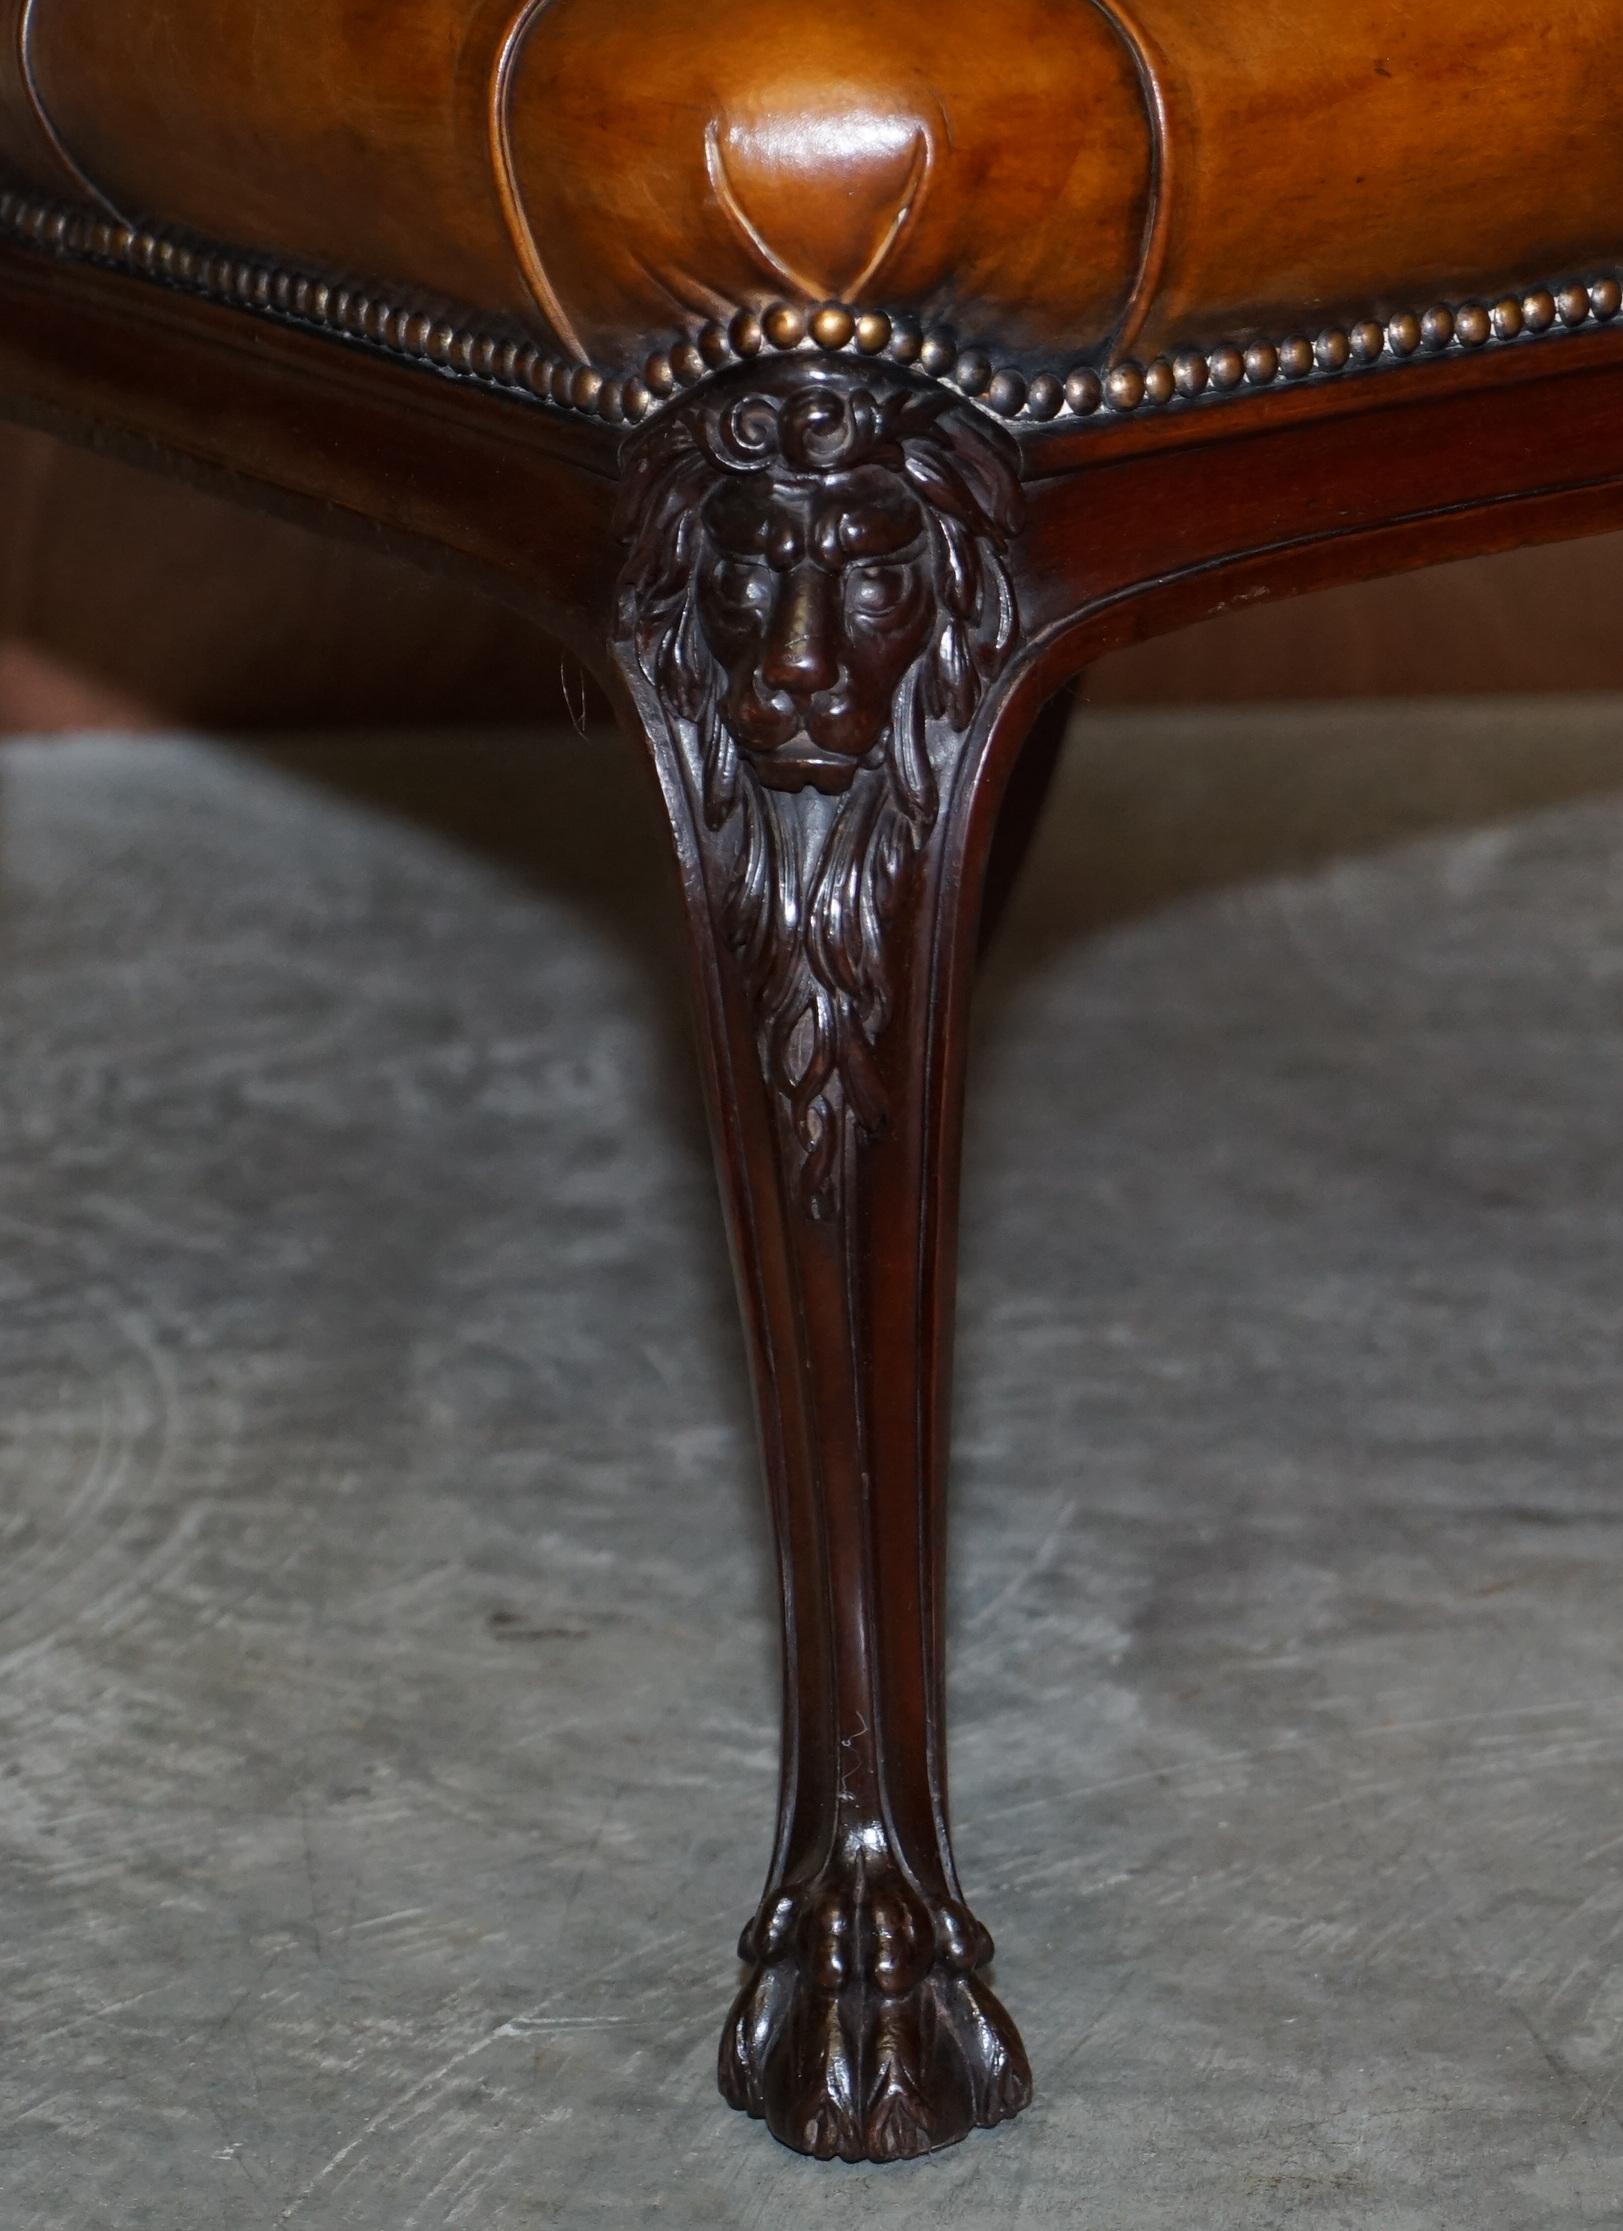 circa 1845 C Hindley & Sons Lion Carved Chesterfield Brown Leather Dining Chairs For Sale 4